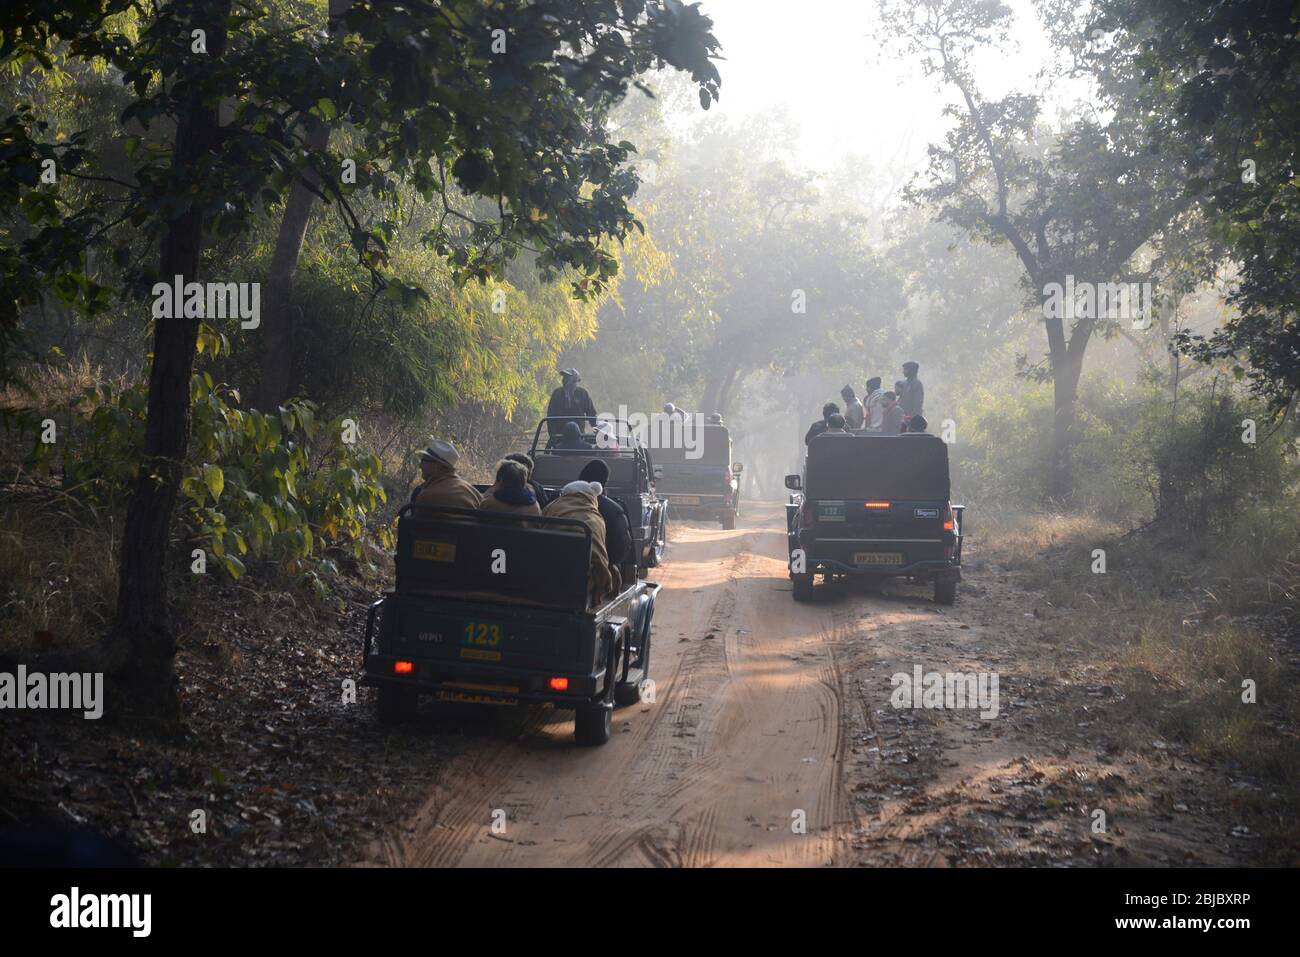 Vehicles and game viewers wait in misty jungle, Bandhavgar national park. Tourists' first visit to India in search of tigers and culture. Stock Photo